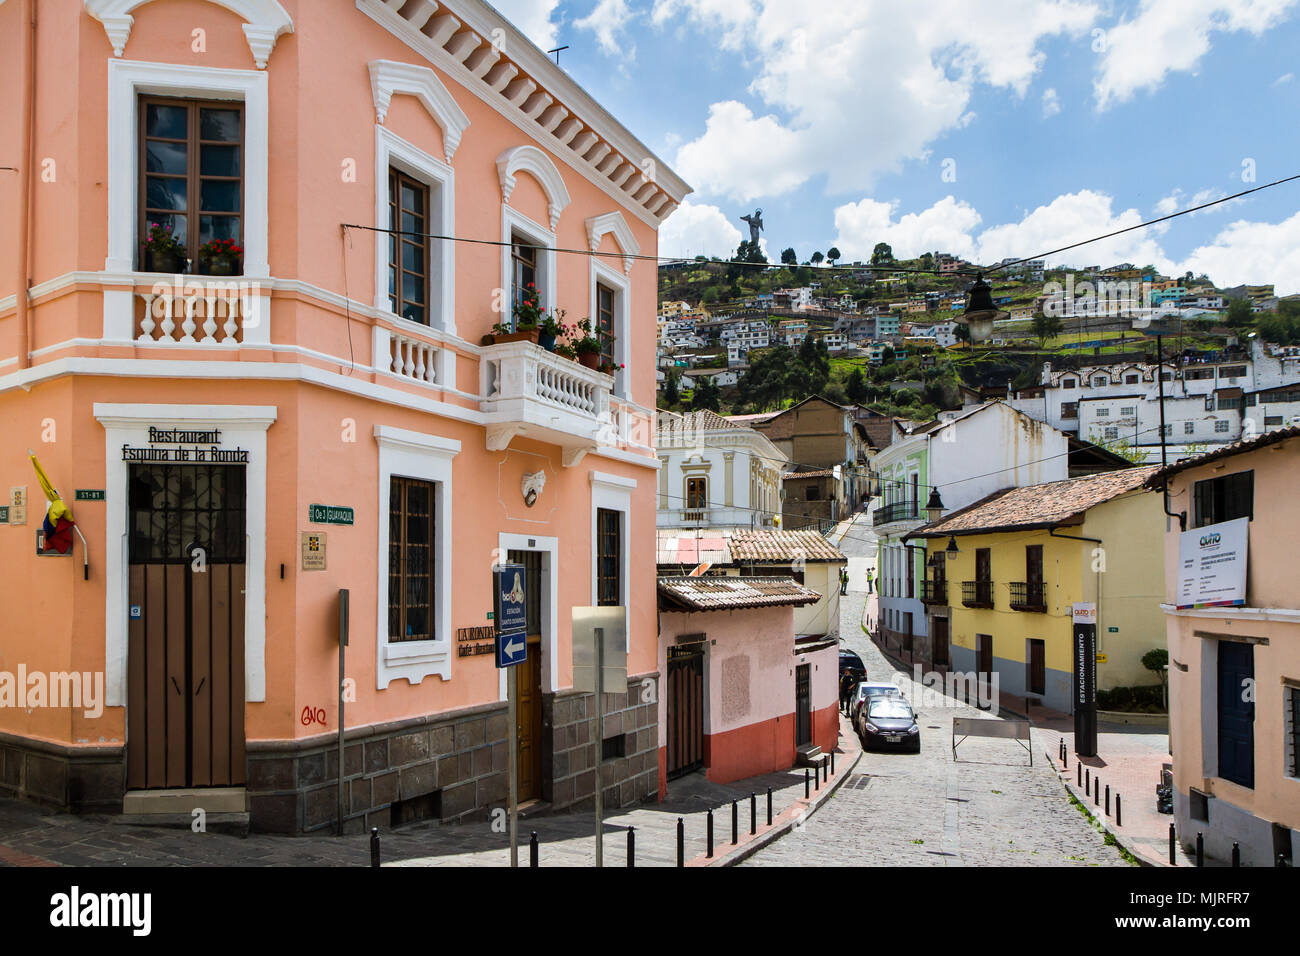 QUITO, ECUADOR - OCTOBER 27, 2015: A typical street scene in the colourful La Ronda area of historic Quito, Ecuador with the famous winged Virgin Mary Stock Photo